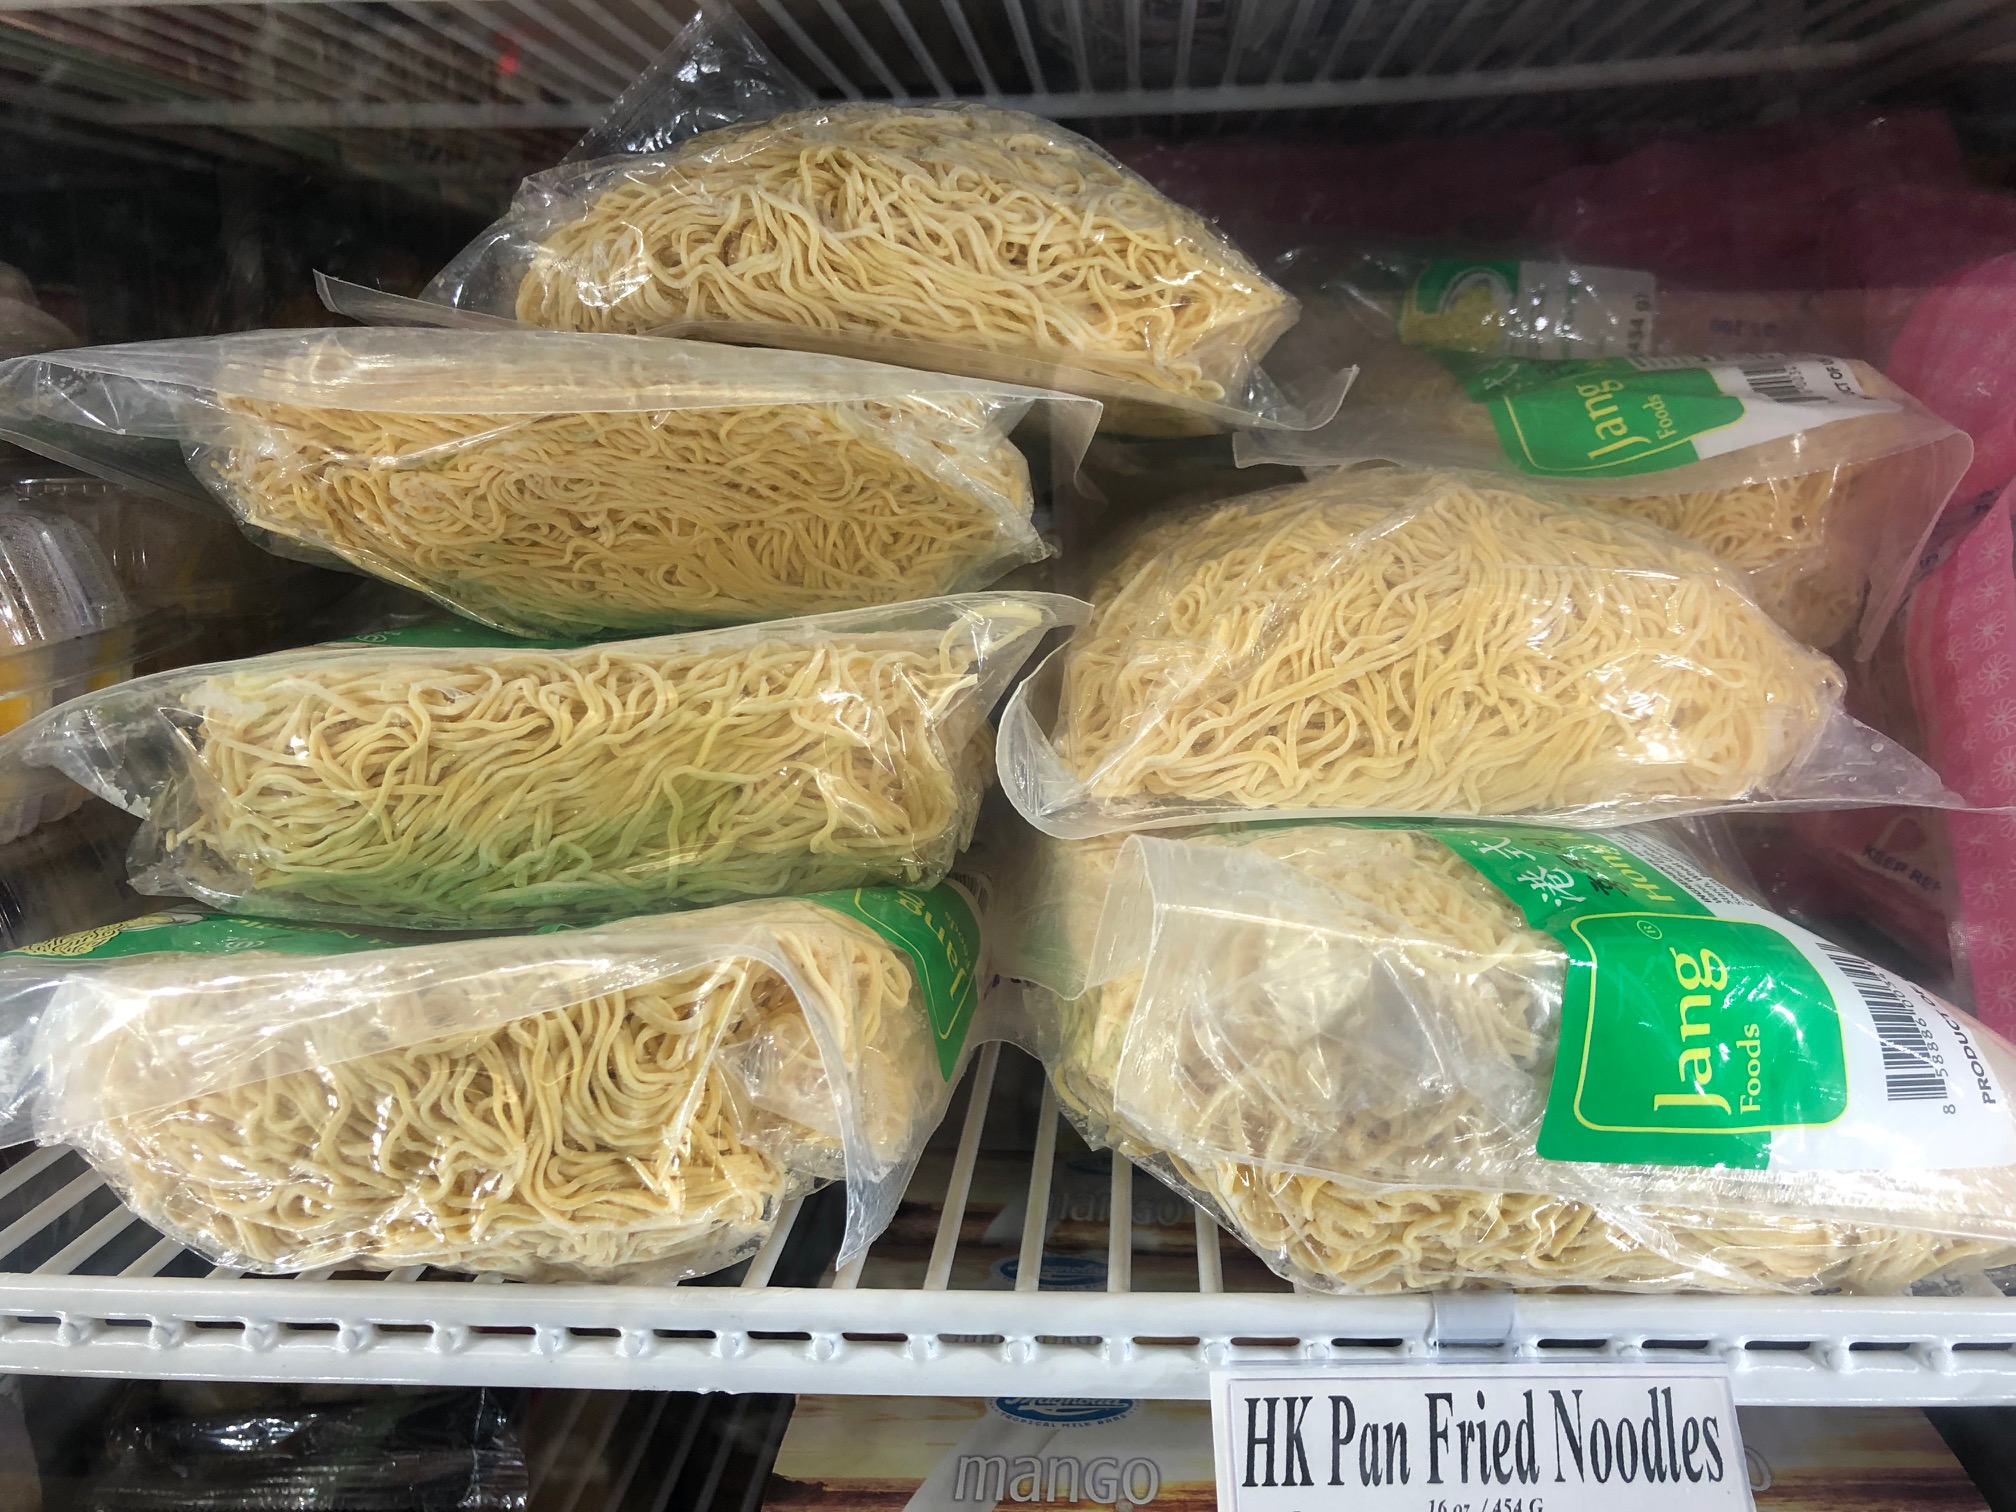 On a white, metal slotted shelf inside a freezer, there are huge bags of noodles. Photo by Alyssa Buckley.